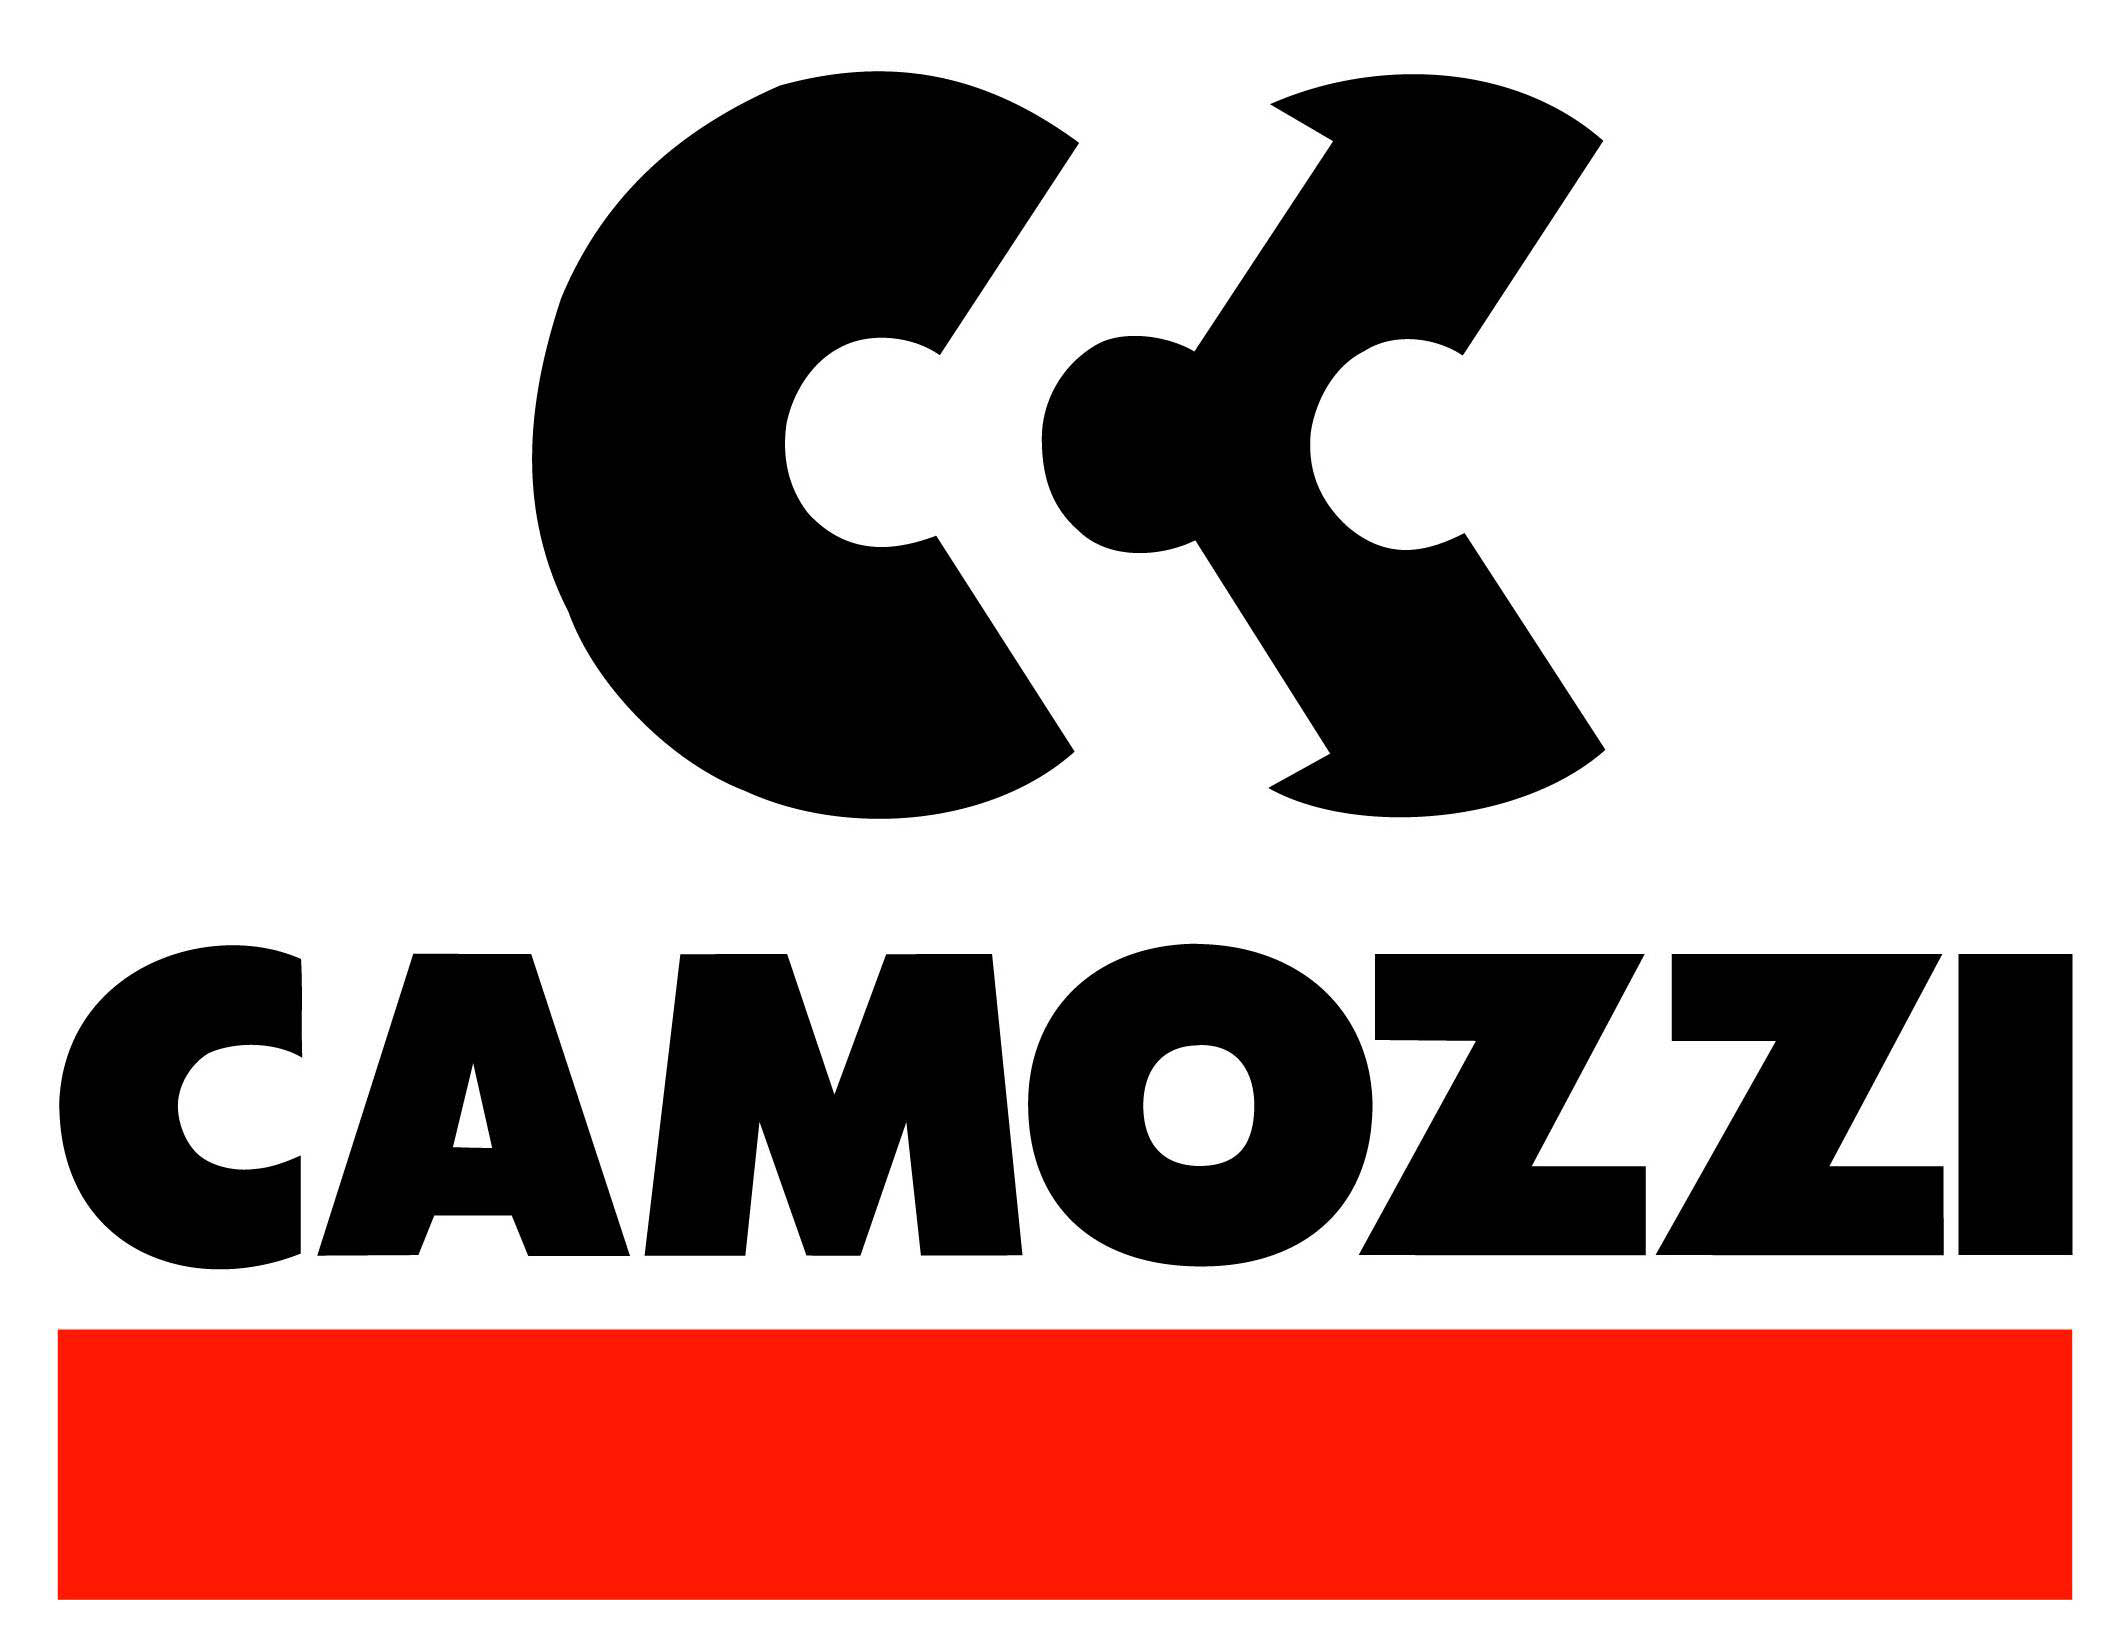 Camozzi Electric actuation for industrial automation